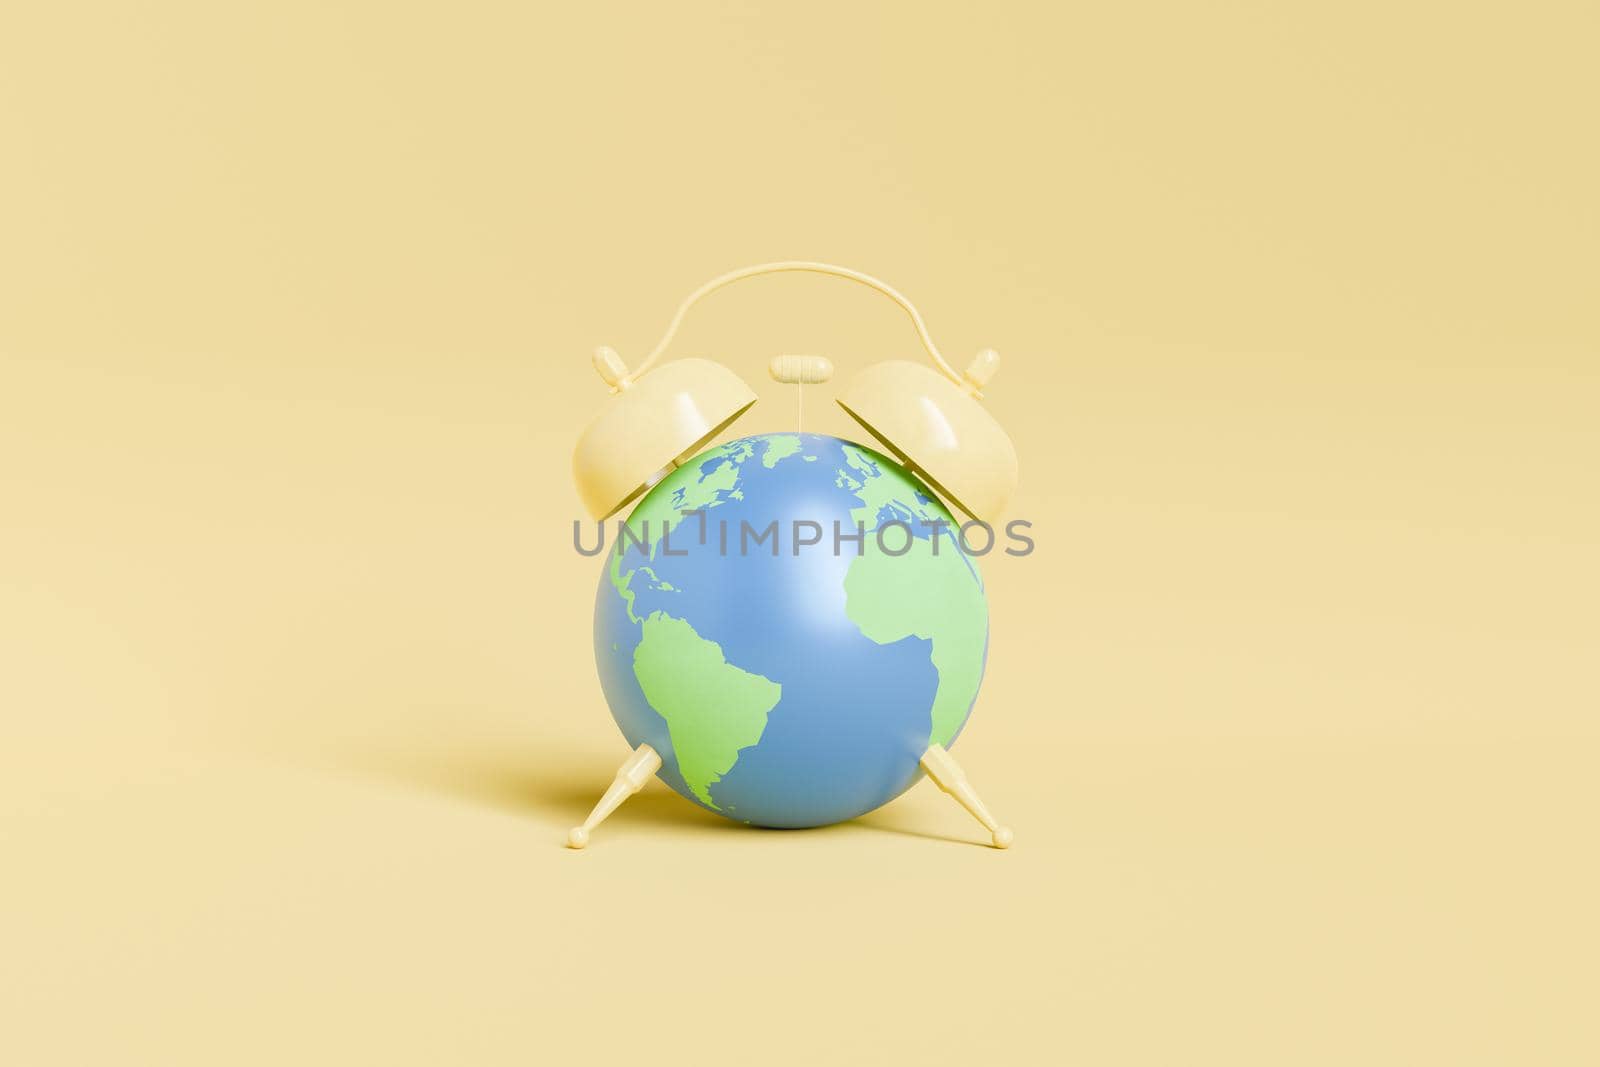 Alarm clock in shape of planet Earth with green continents and blue oceans placed on yellow background in light studio. 3d rendering